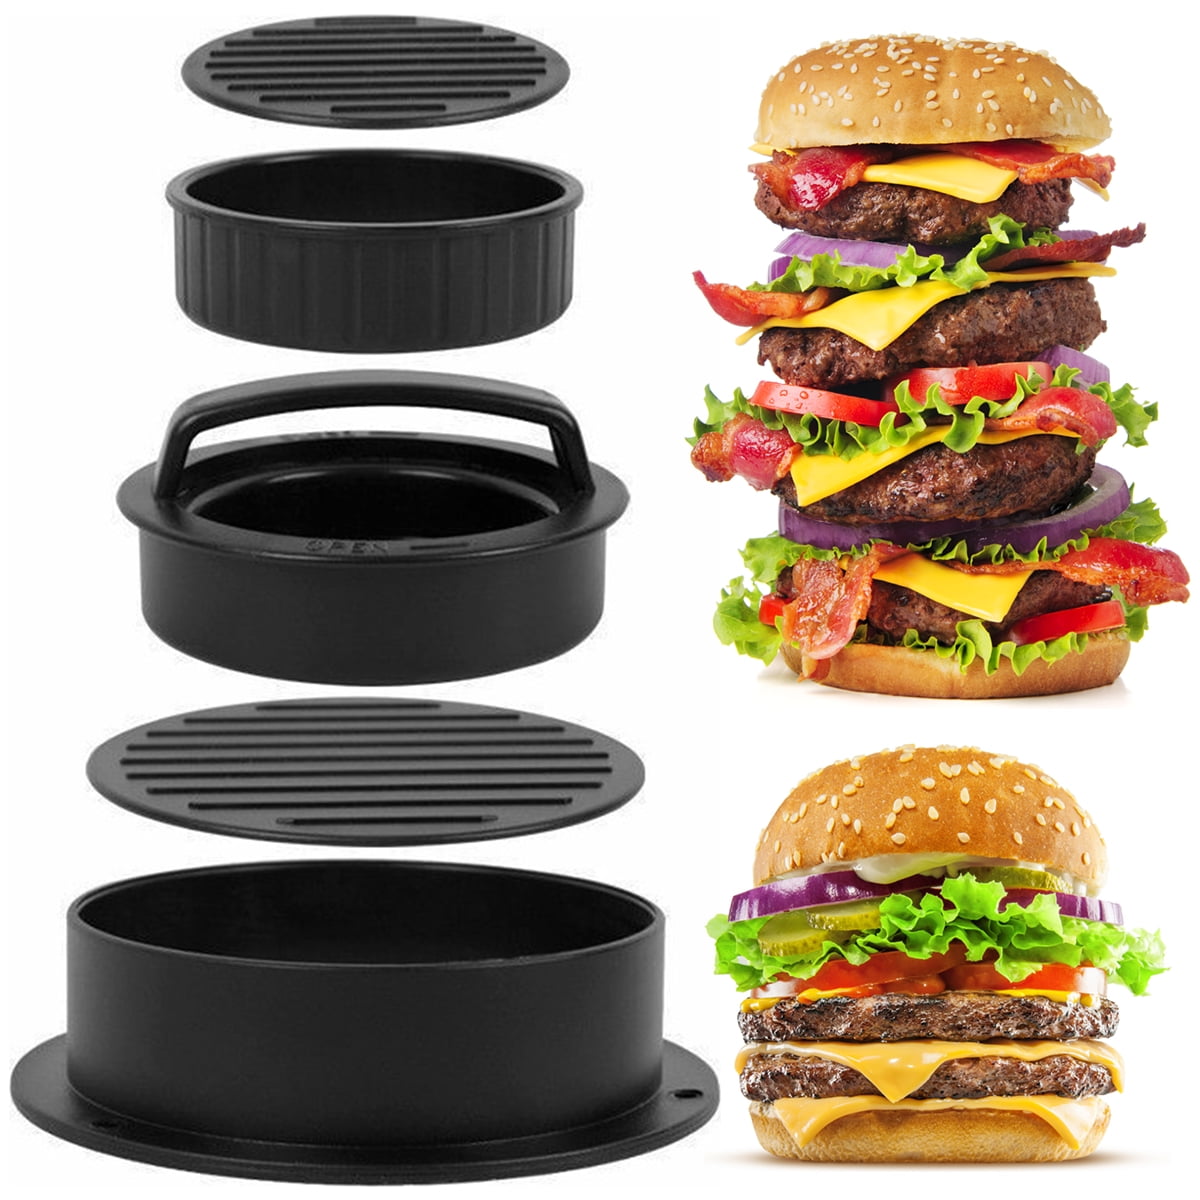 and More The Burger Mate Non-Stick As Seen On TV Burger Press Hamburger Patty Maker for BBQ Grill Parties Dinner Black 